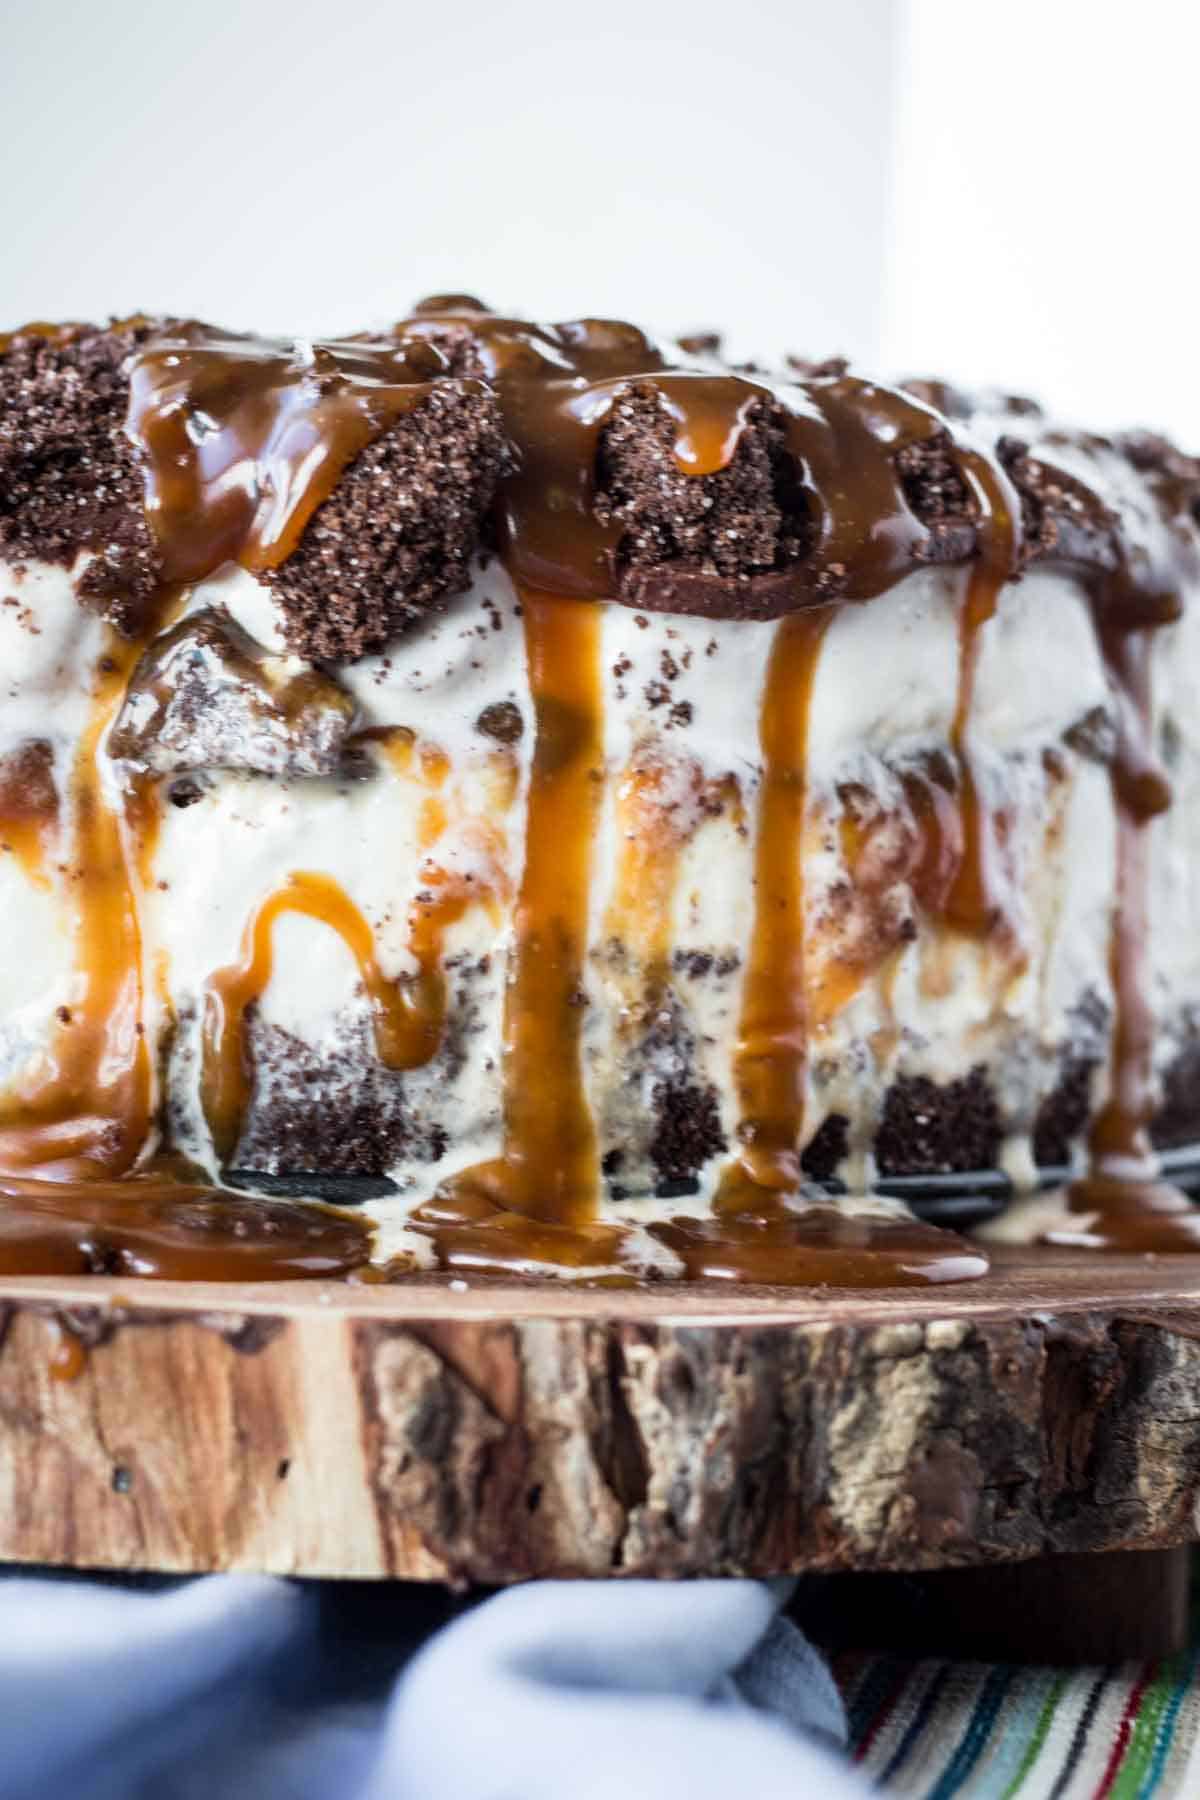 The side of a layered homemade ice cream cake with chocolate and caramel.